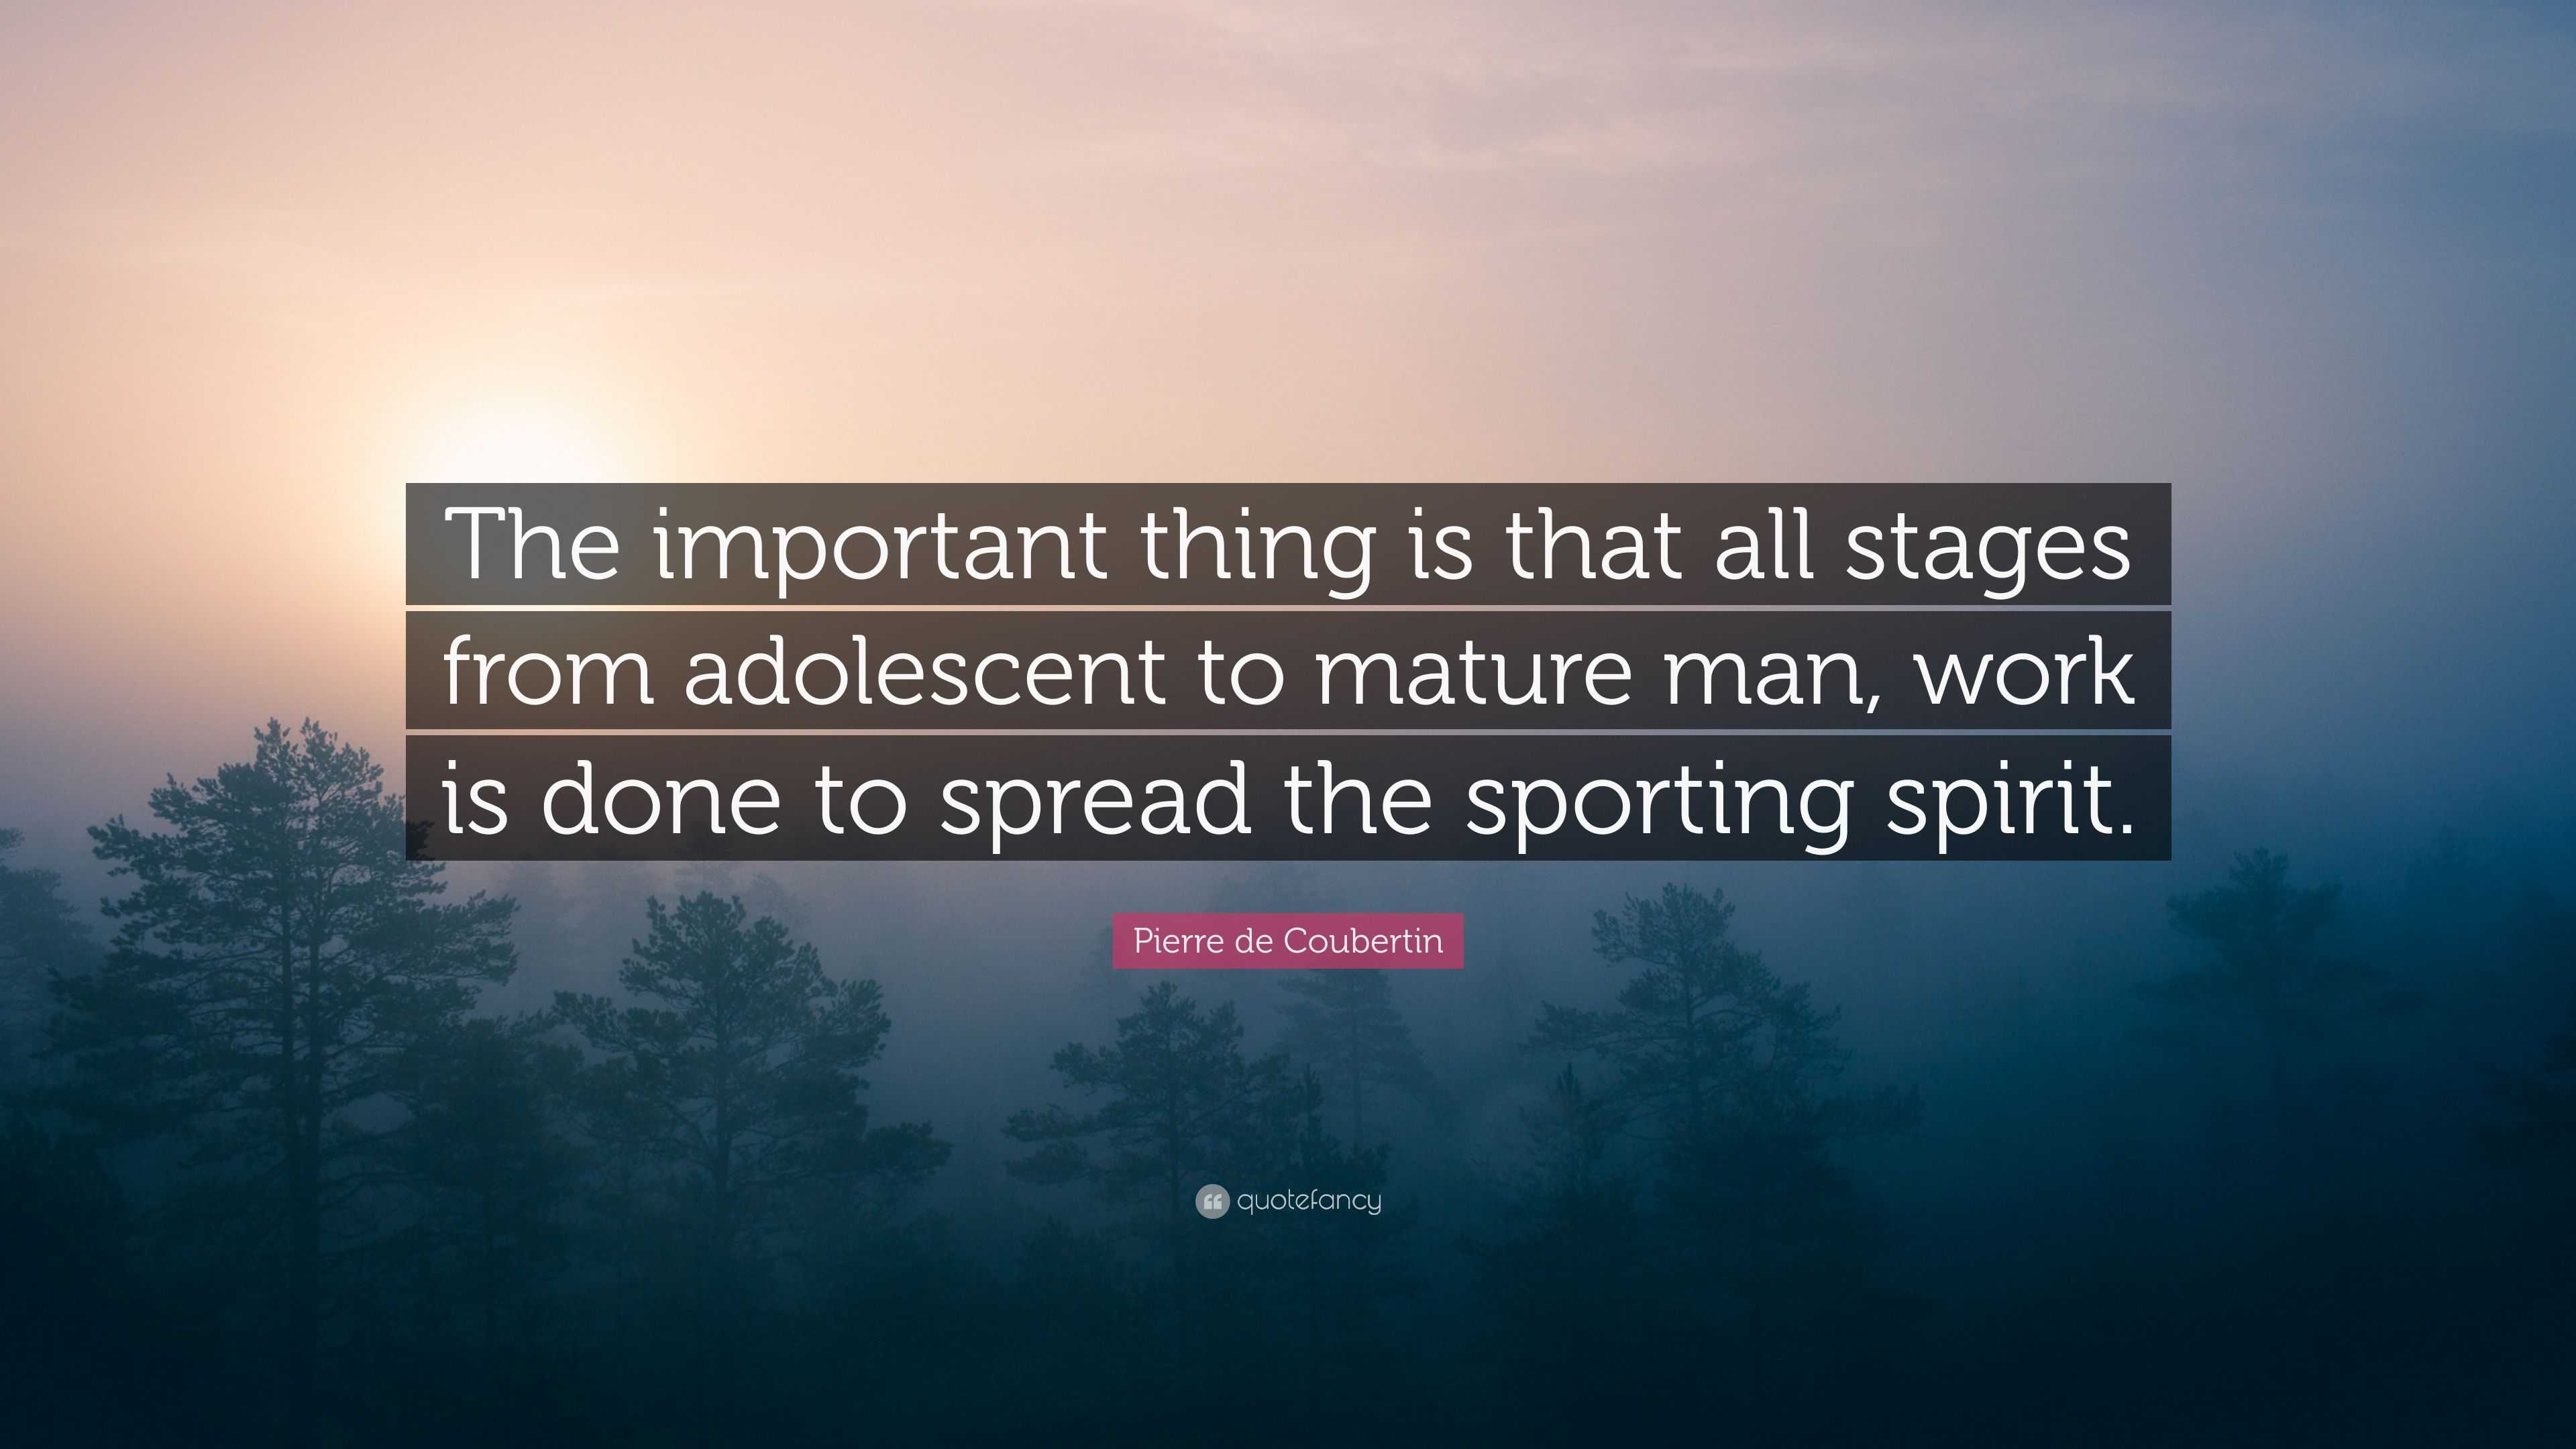 Pierre de Coubertin Quote “The important thing is that all stages from adolescent to